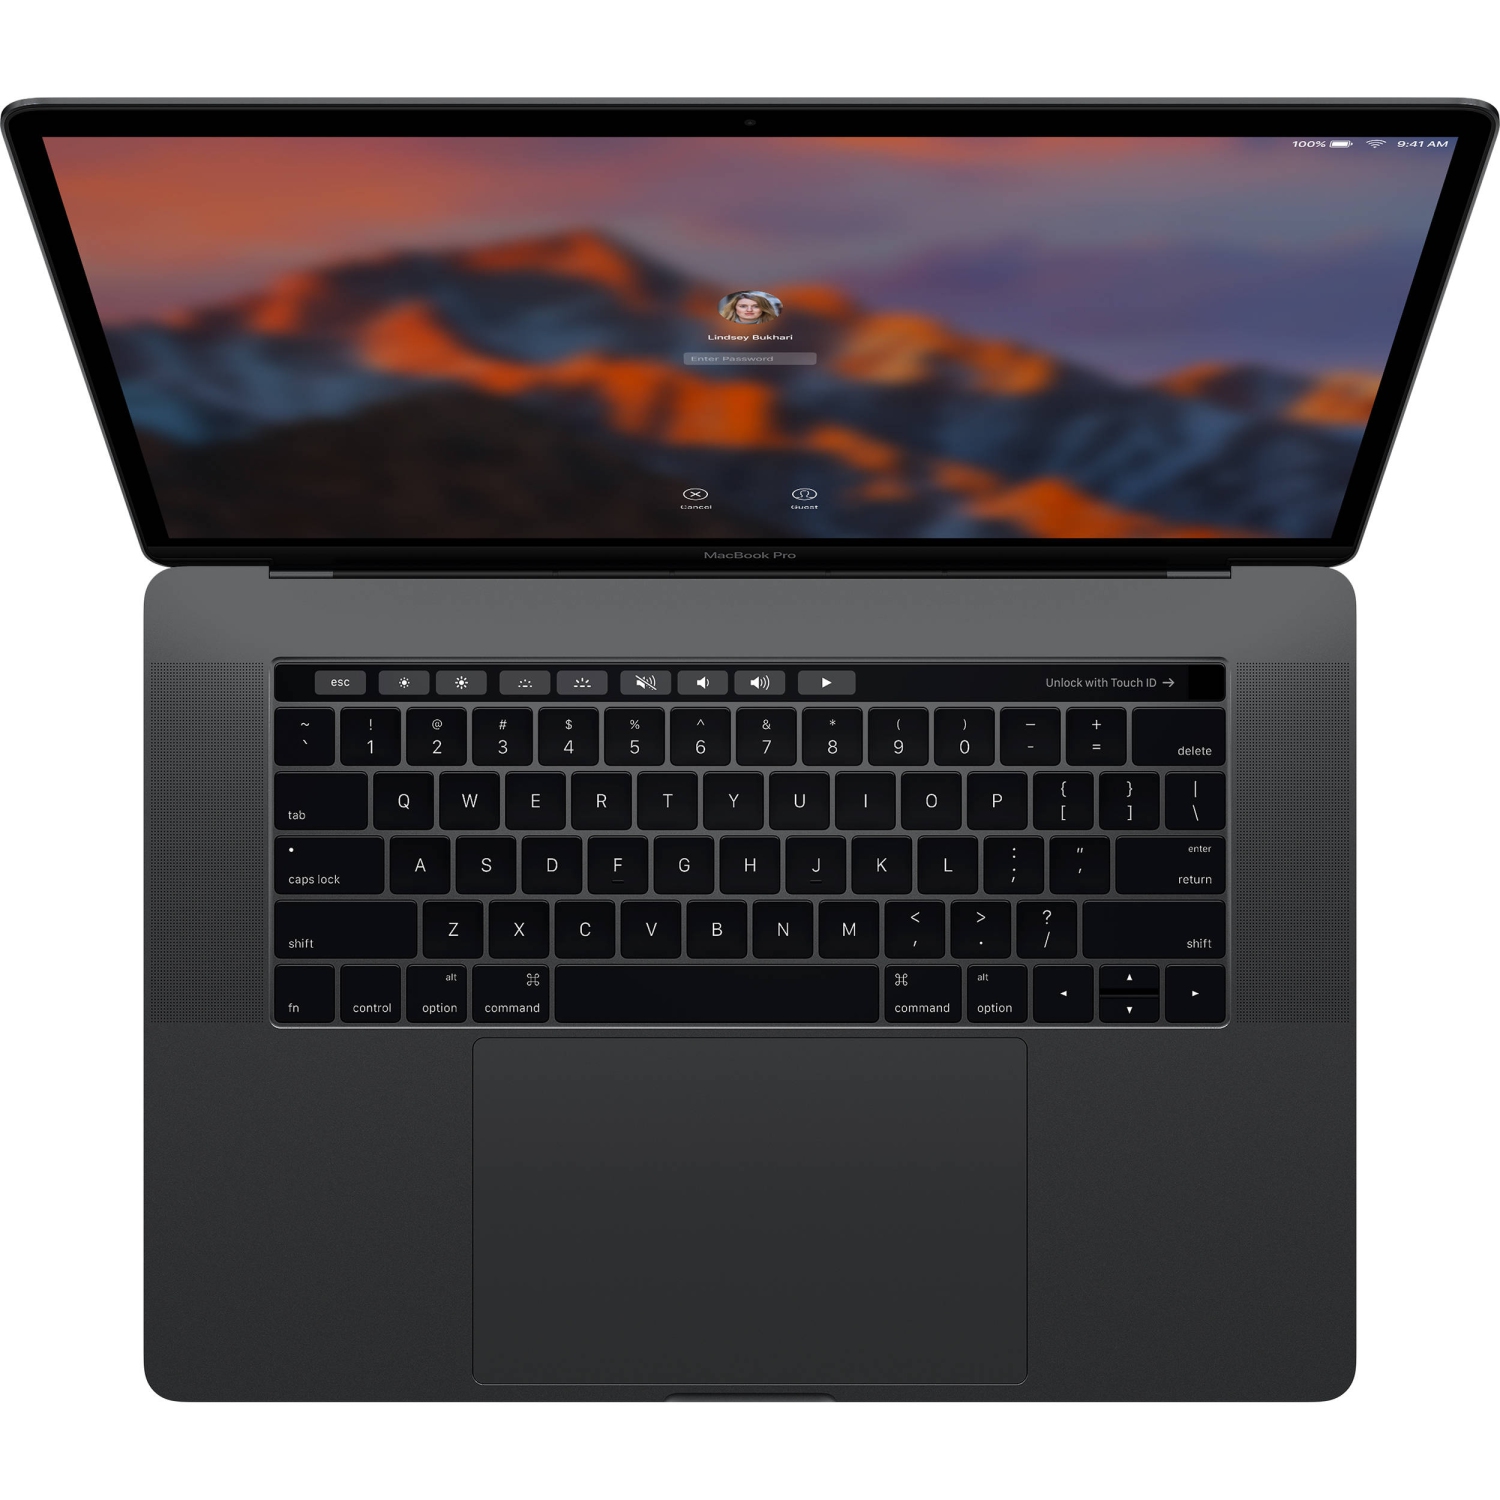 Refurbished (Excellent) - MacBook Pro 15" Retina 2.8GHz i7 16GB / 512GB Touch Bar - Space Gray - 2017 Model - Refurb, Grade A, Excellent, 9/10!